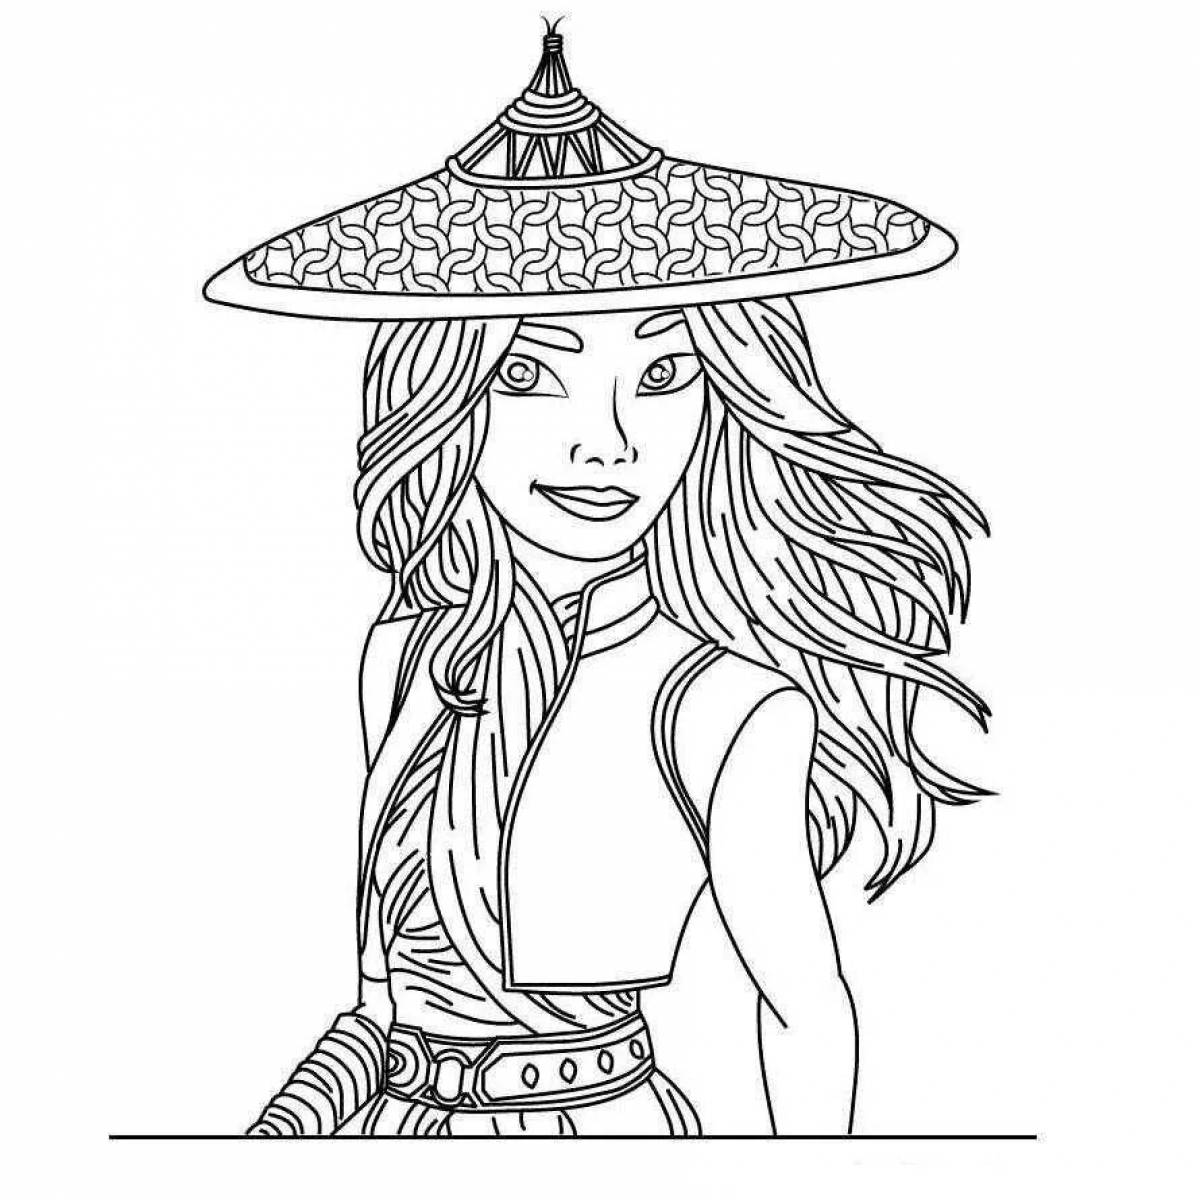 Charming paradise coloring book